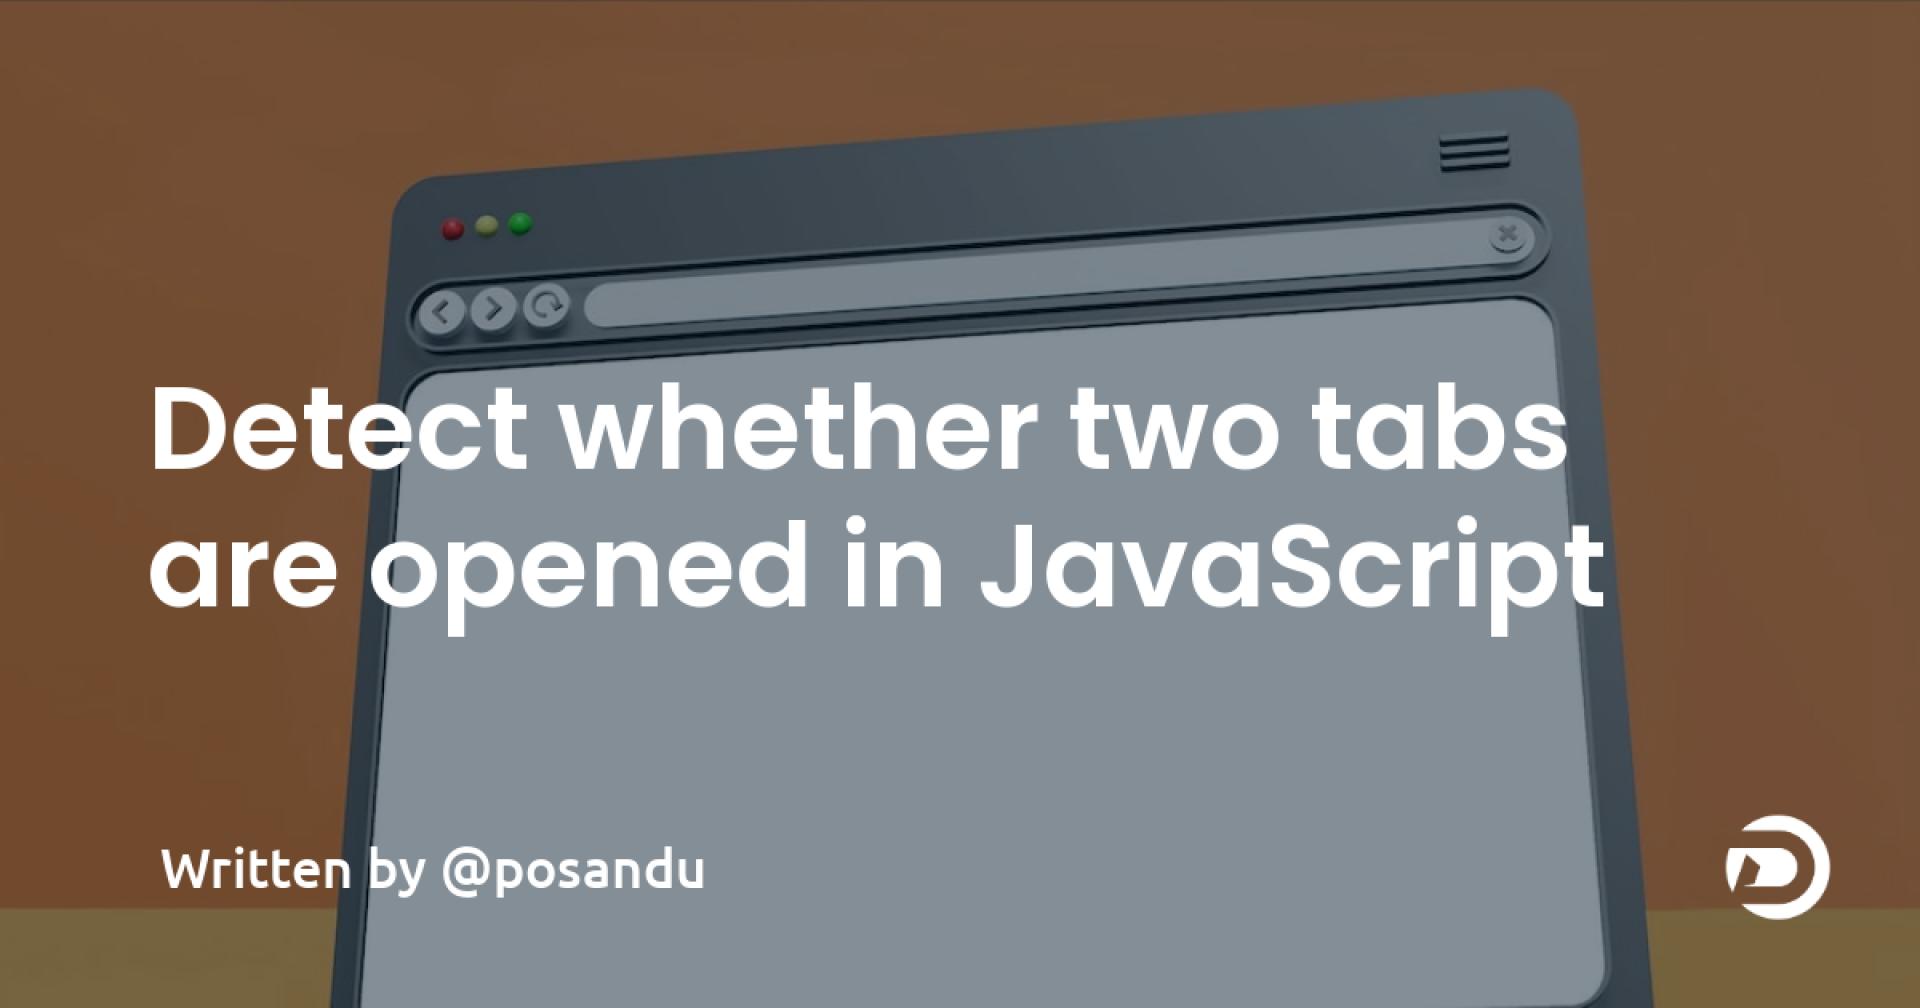 Detect whether two tabs are opened in JavaScript